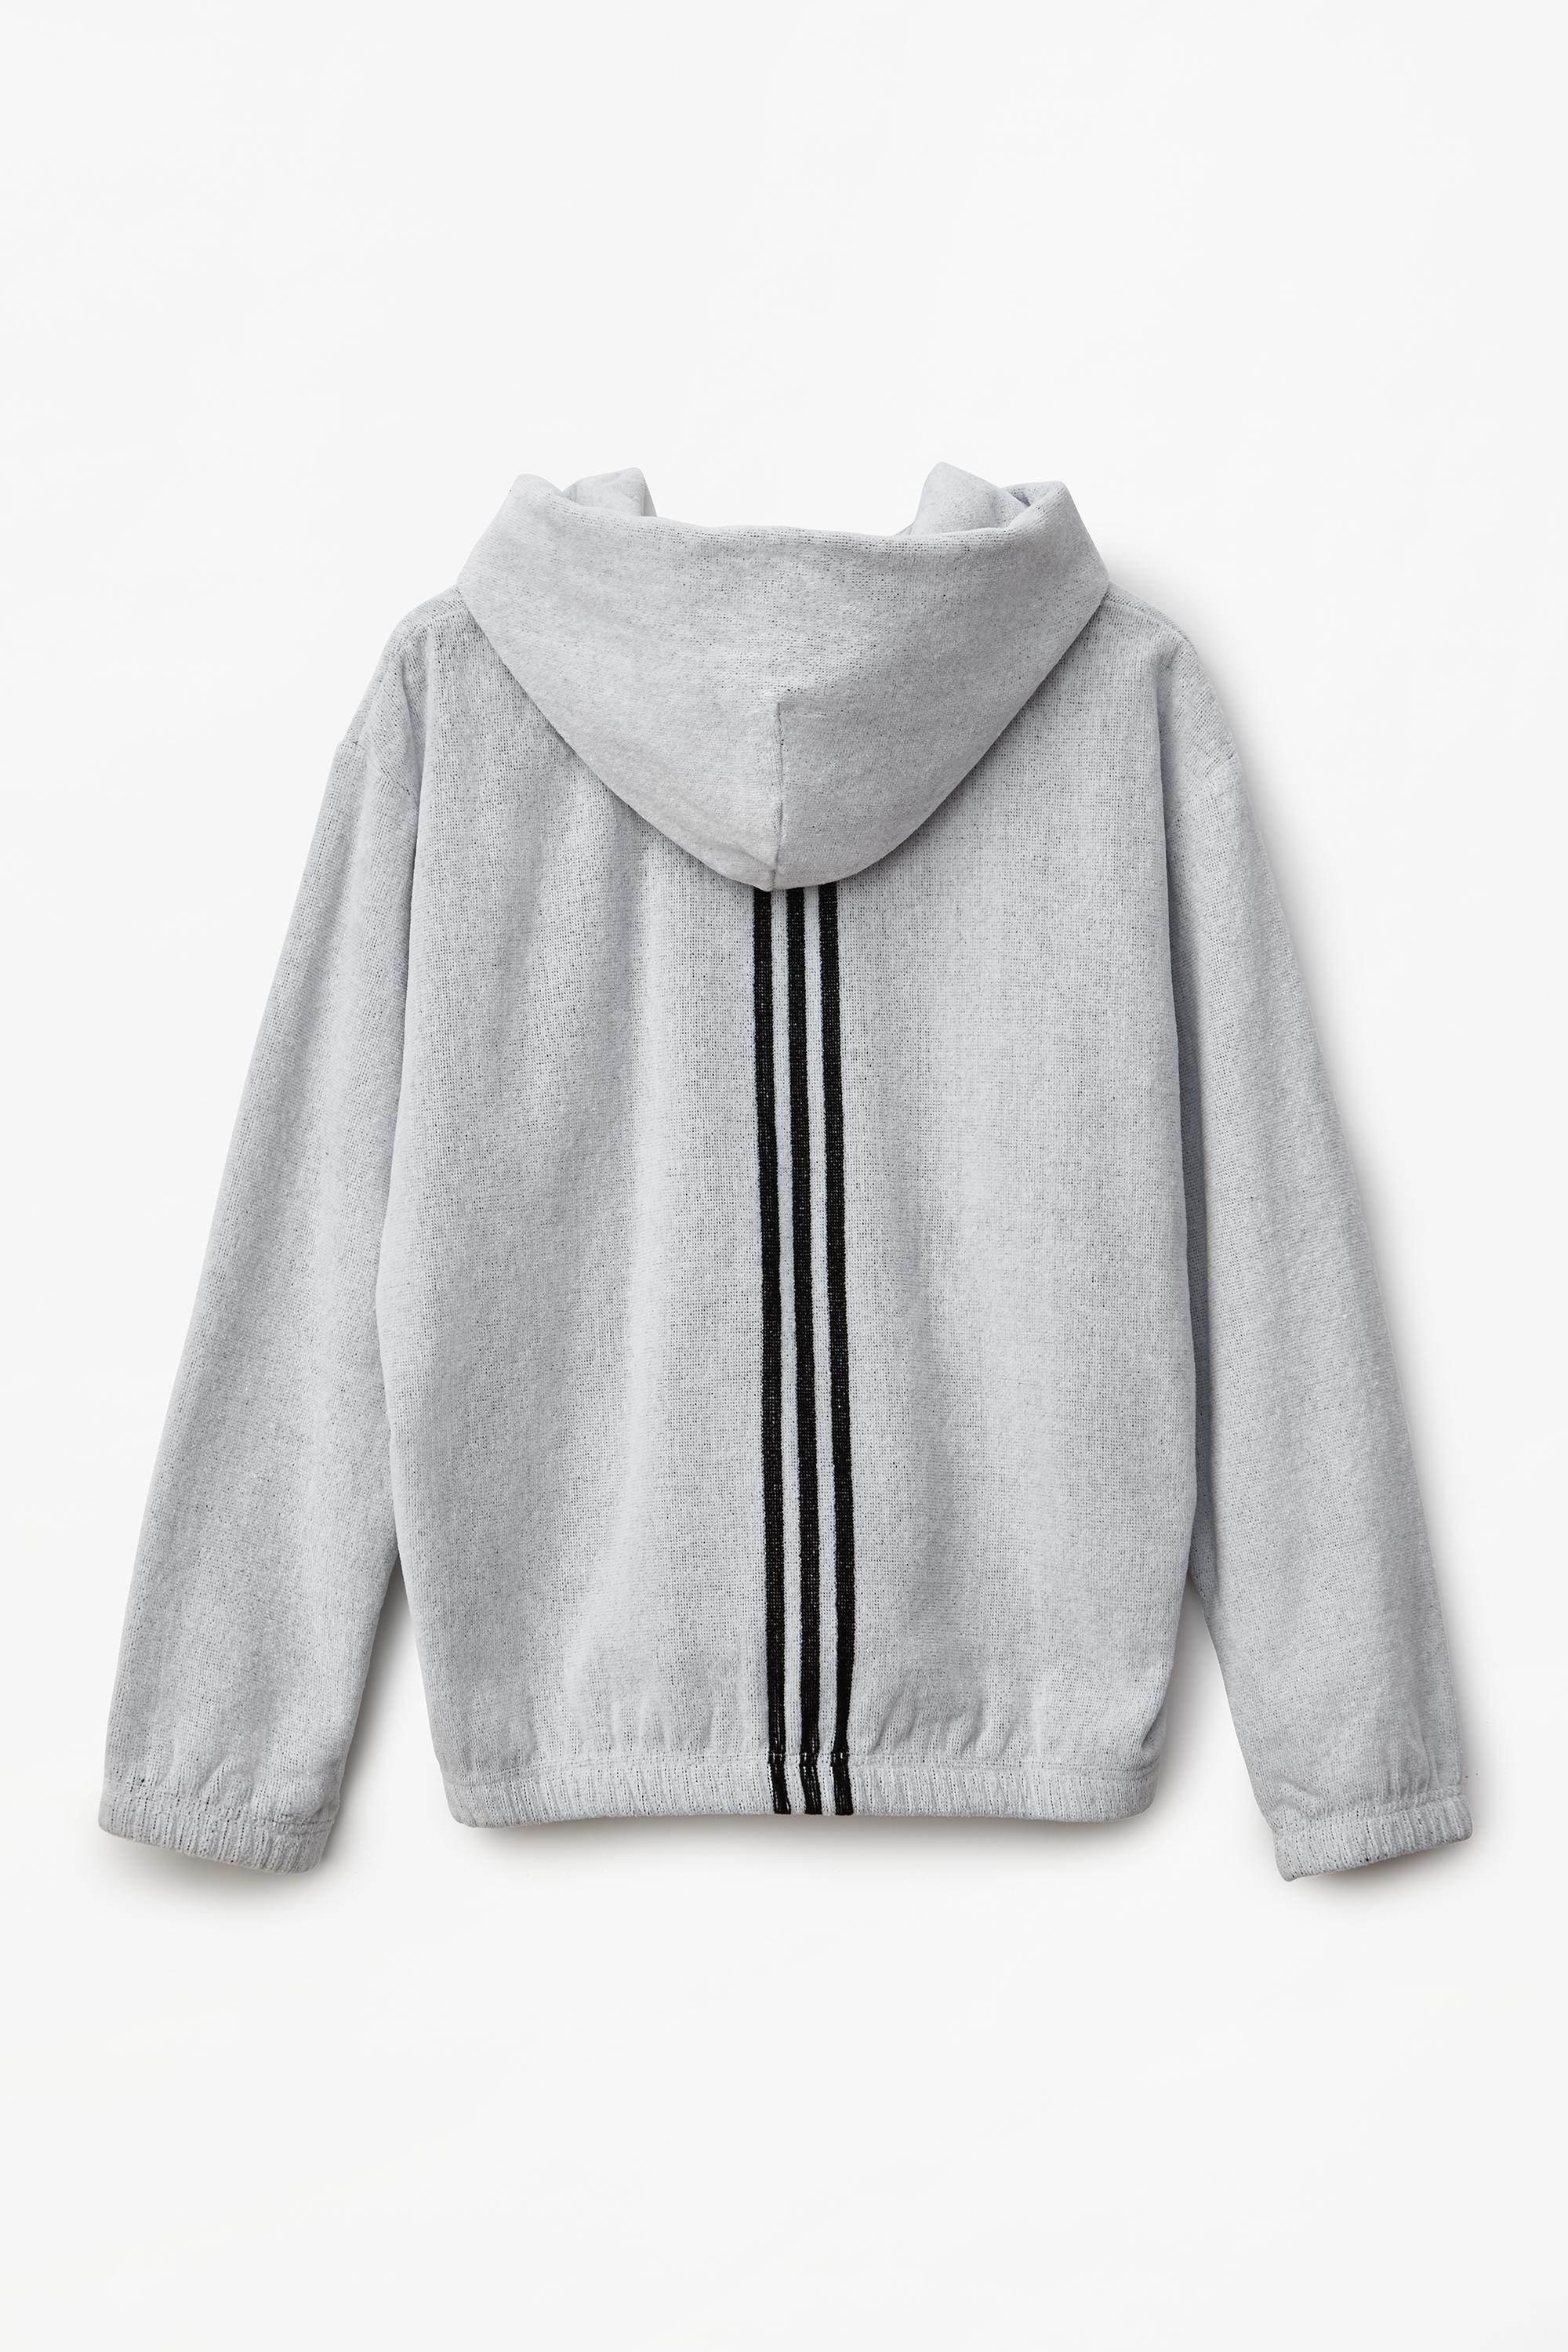 Alexander Wang Adidas Originals By Aw Towel Hoodie in White for Men - Lyst